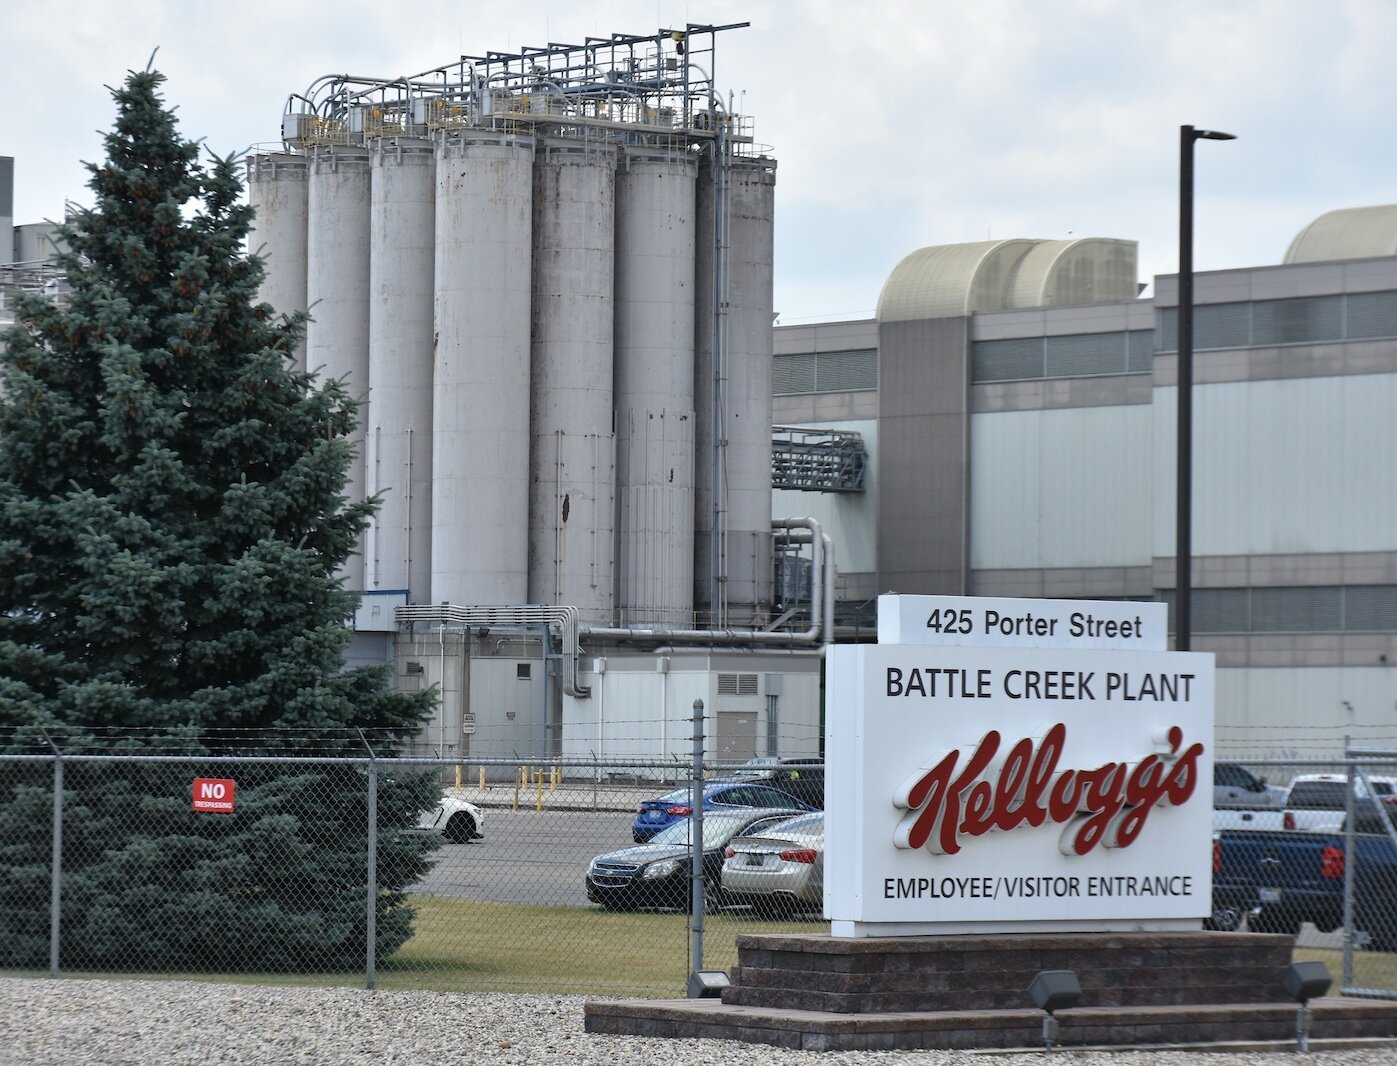 Kellogg Company has one cereal-making plant in Battle Creek.